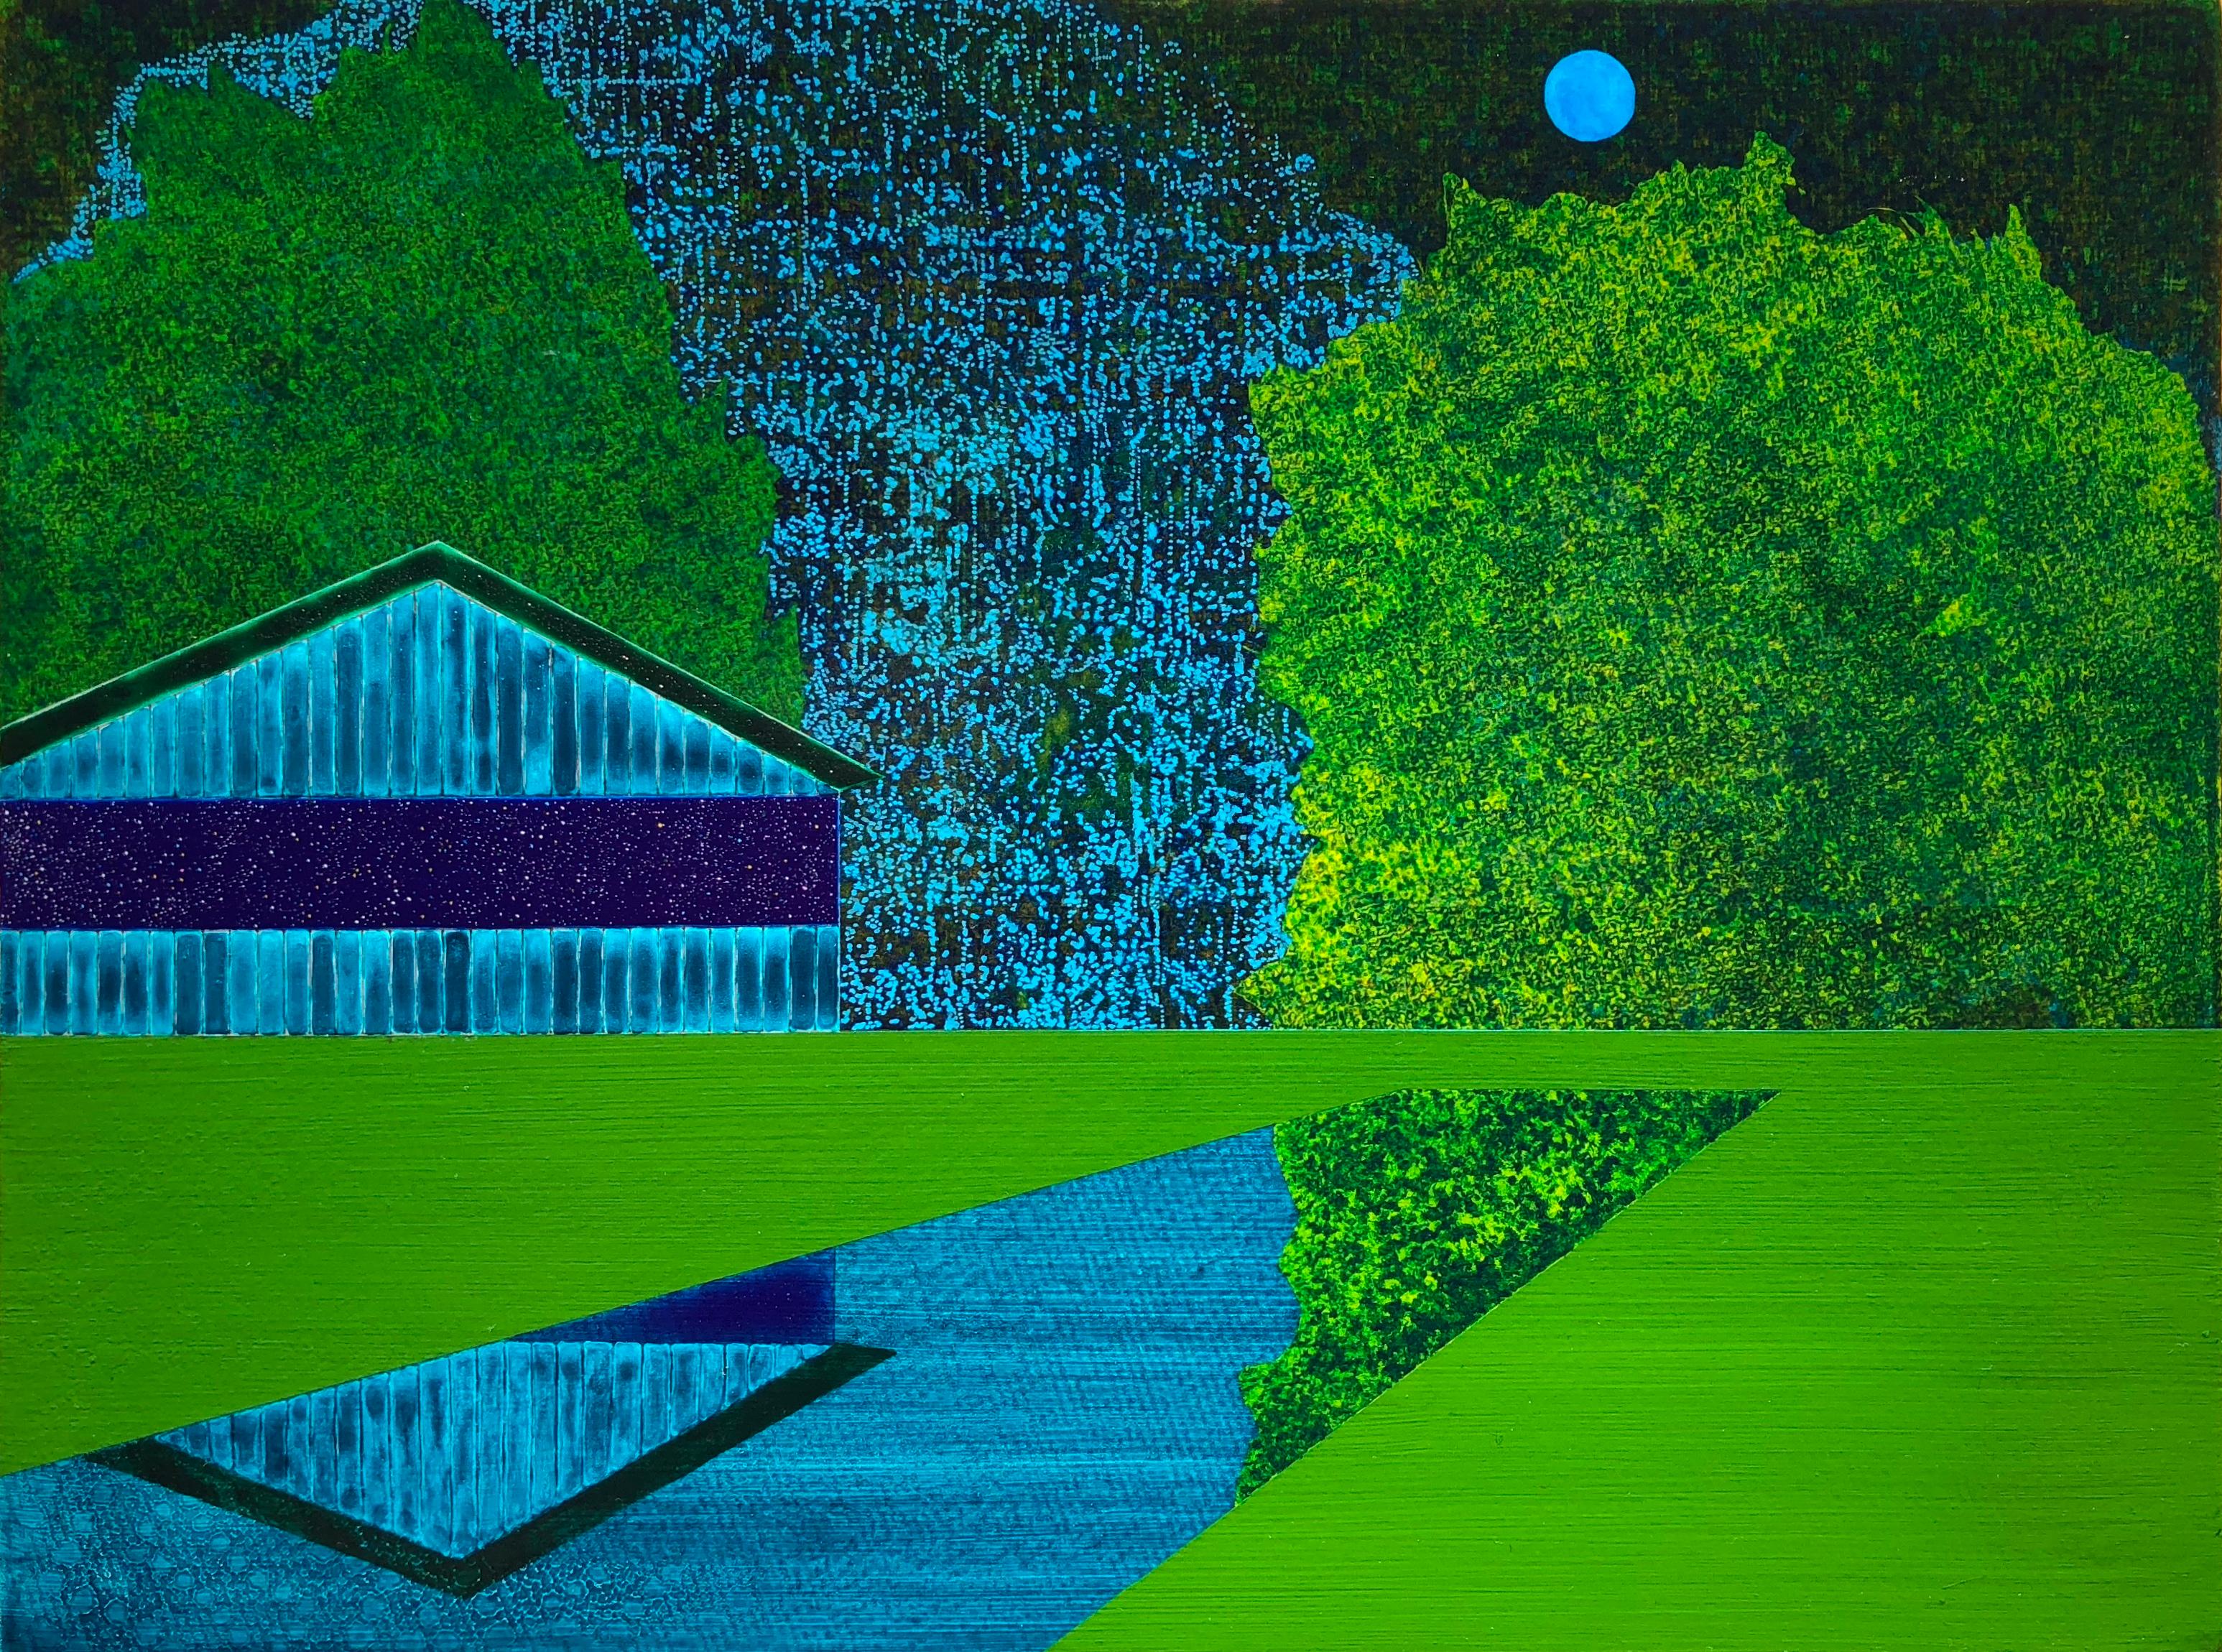 James Isherwood Landscape Painting - Wishing An Ocean, green and blue landscape on wood panel